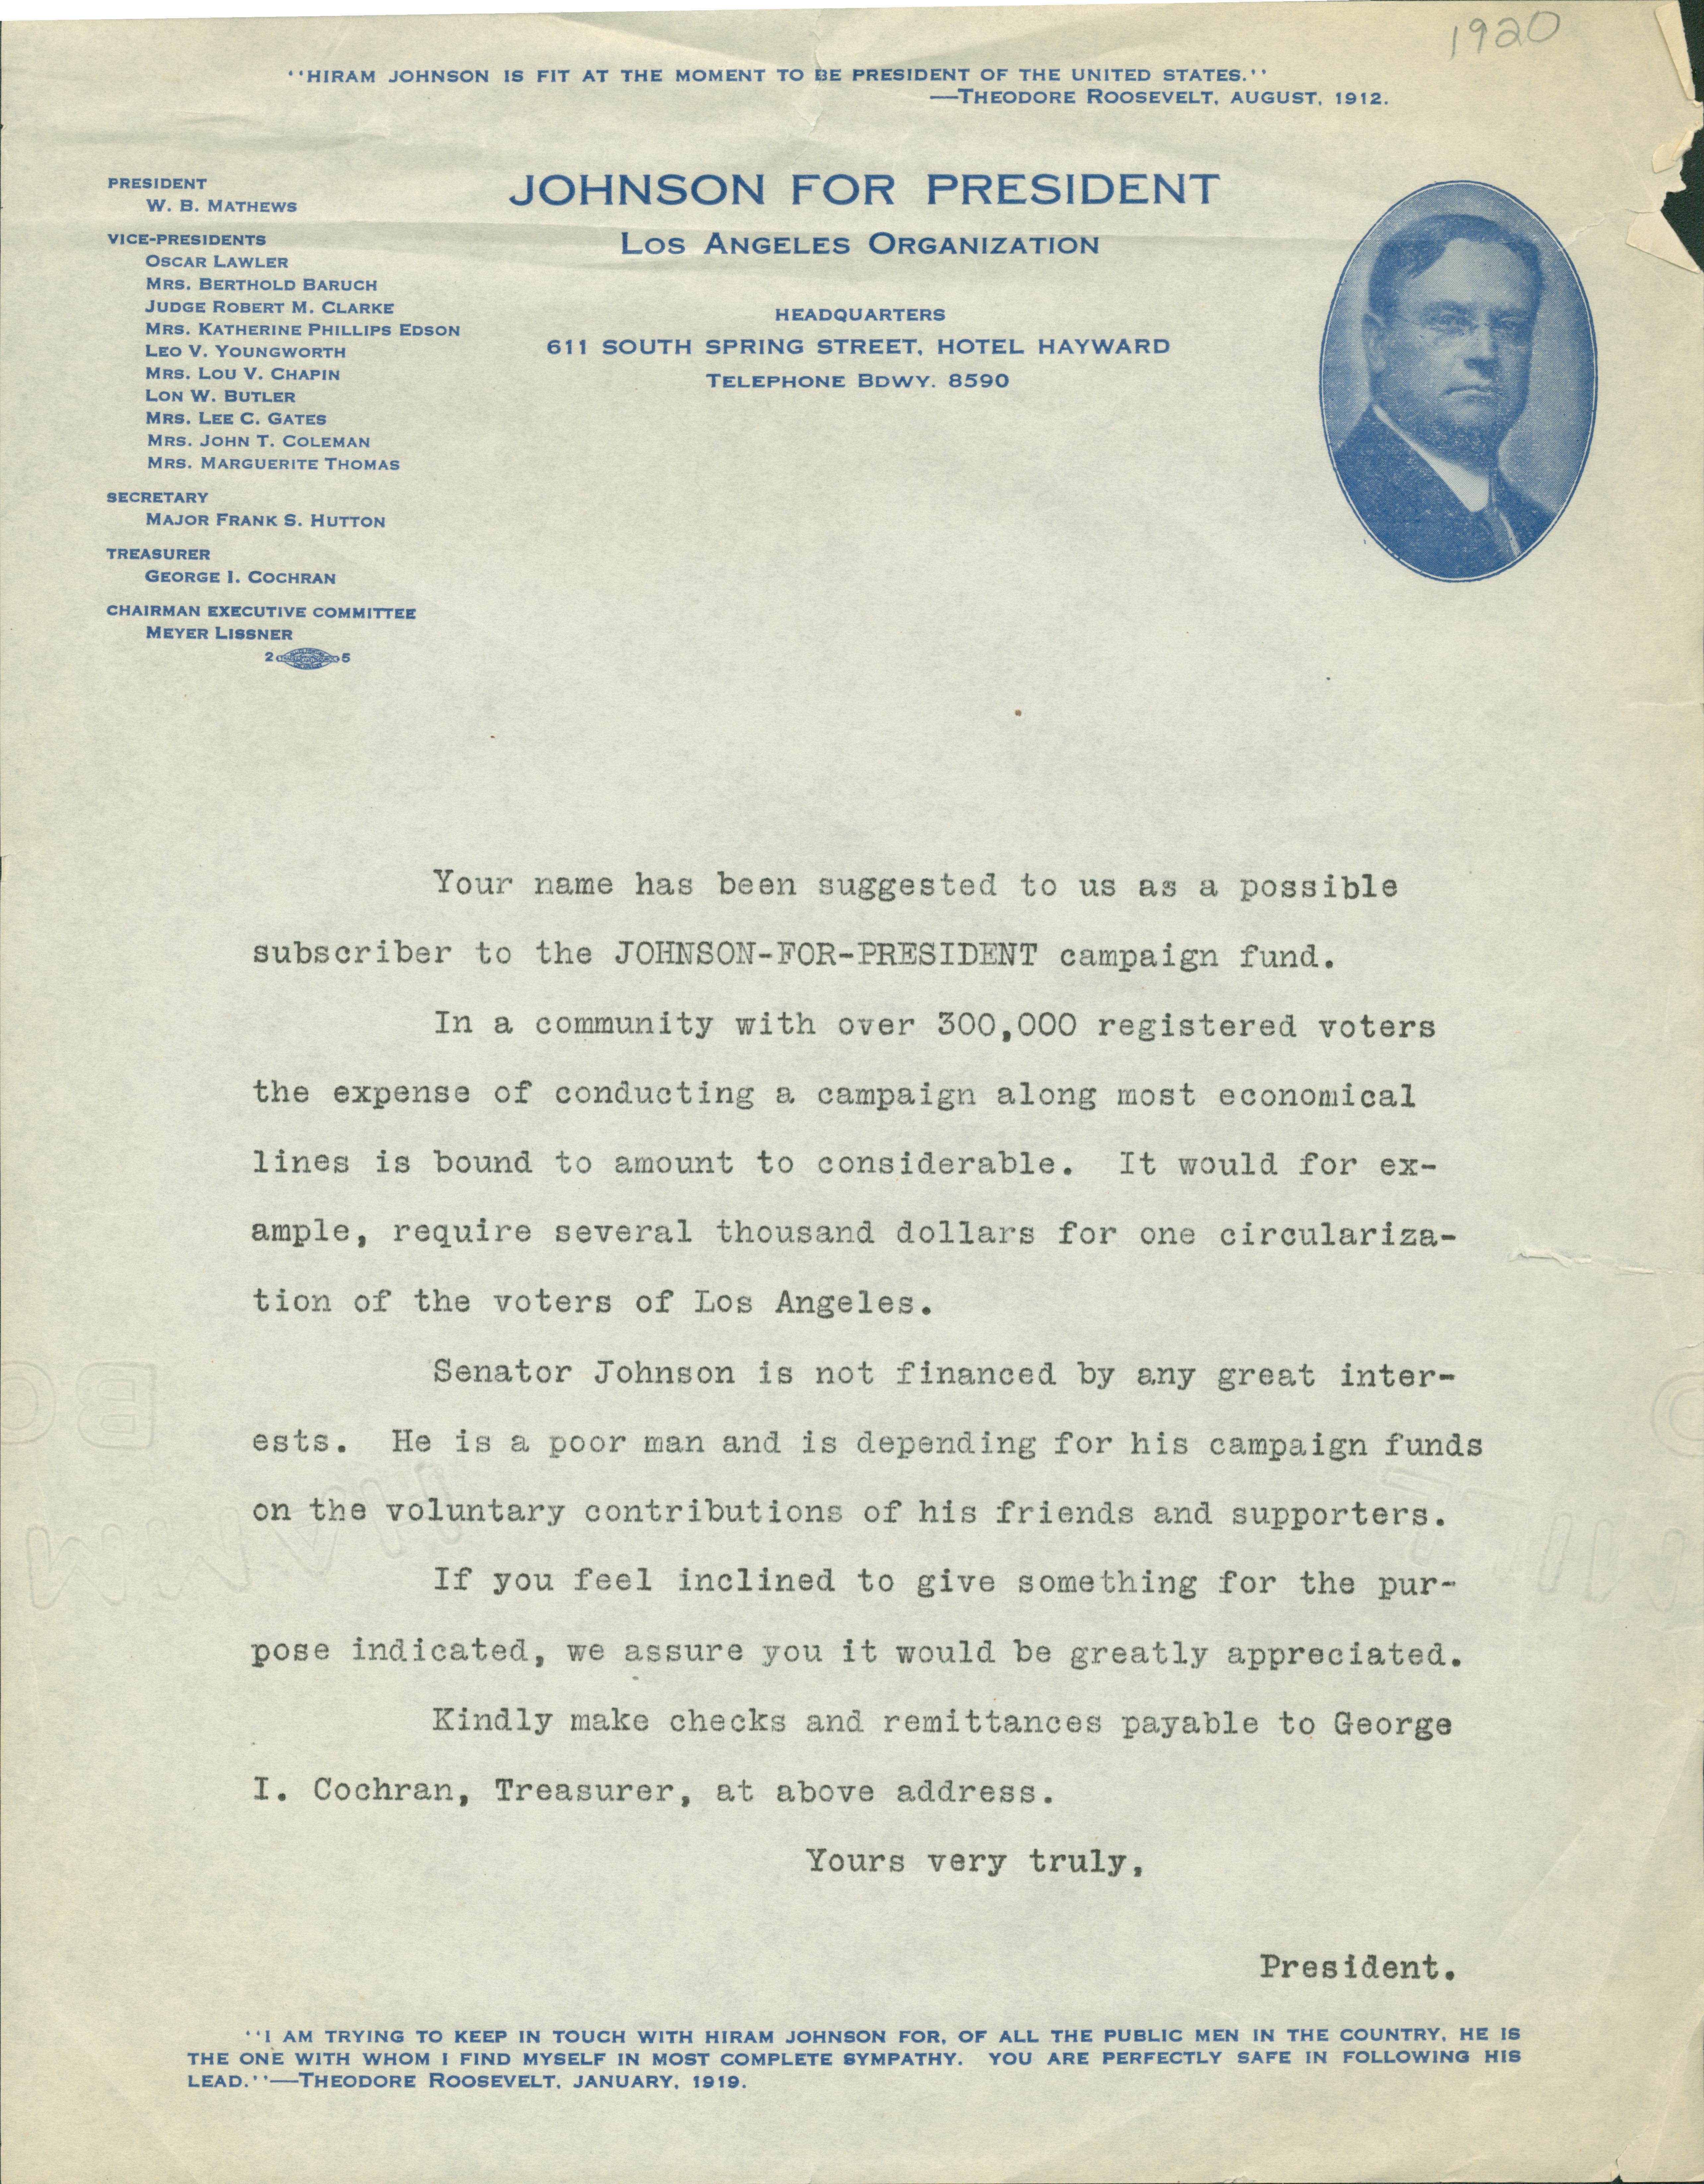 This letter put out by the Los Angeles chapter of 'Johnson for President' asks the reader to contribute money to Johnson's political campaign.